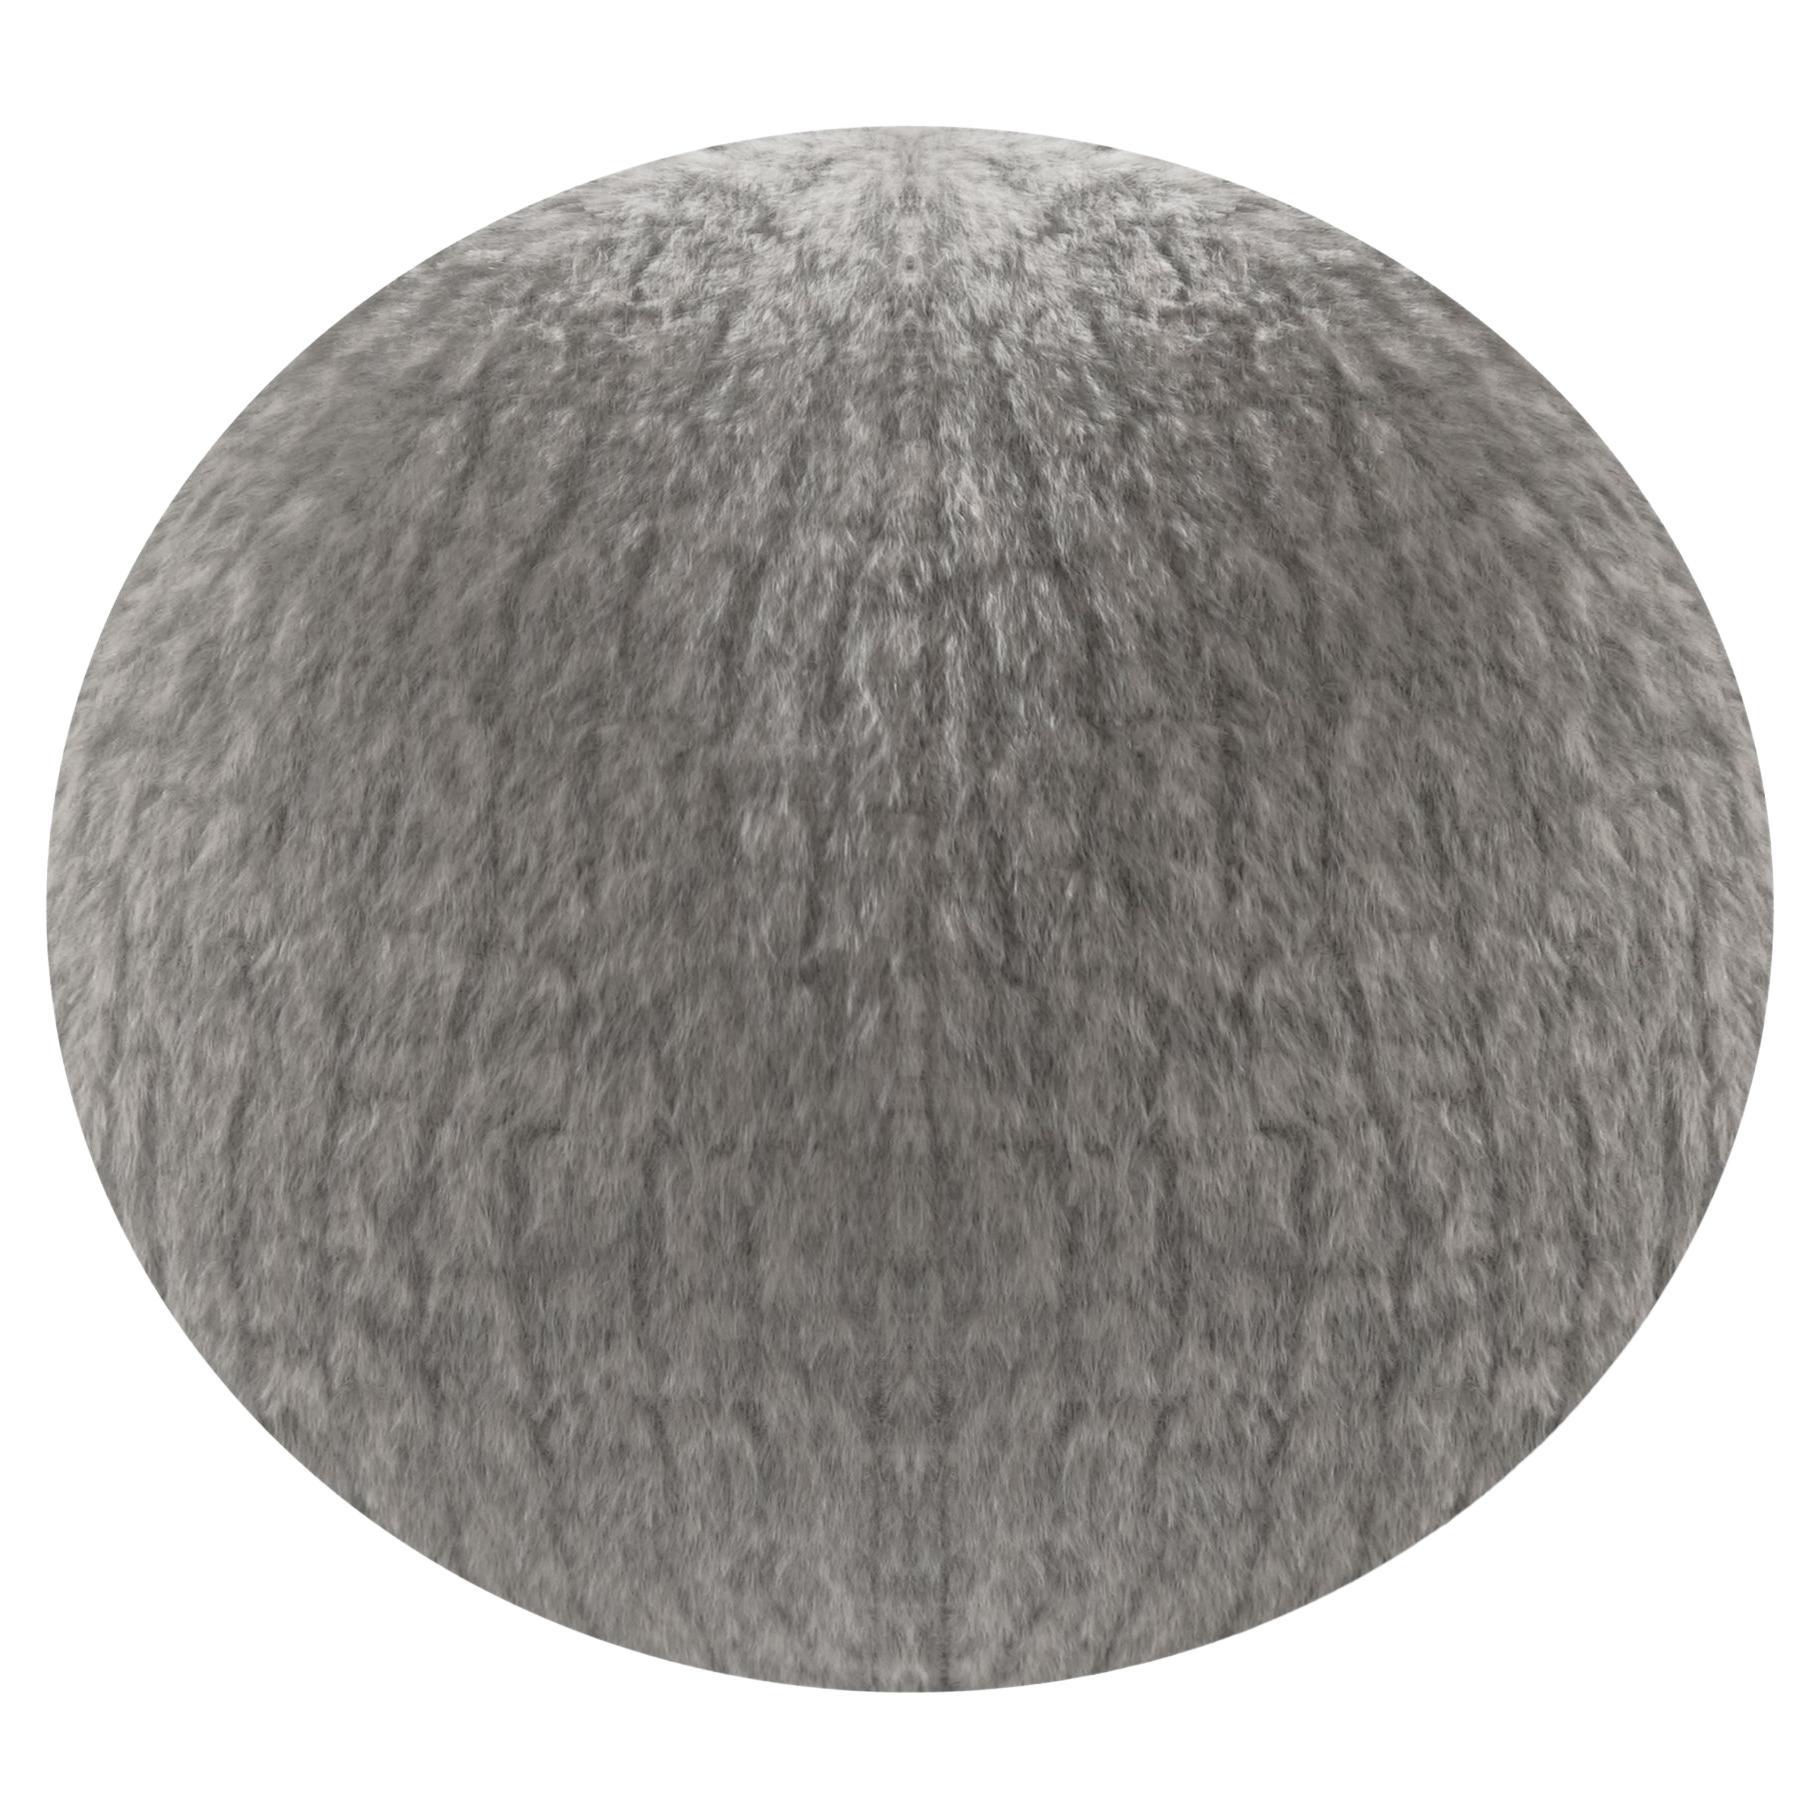 Orb Accent Pillow in Slate Grey Alpaca by Holly Hunt For Sale